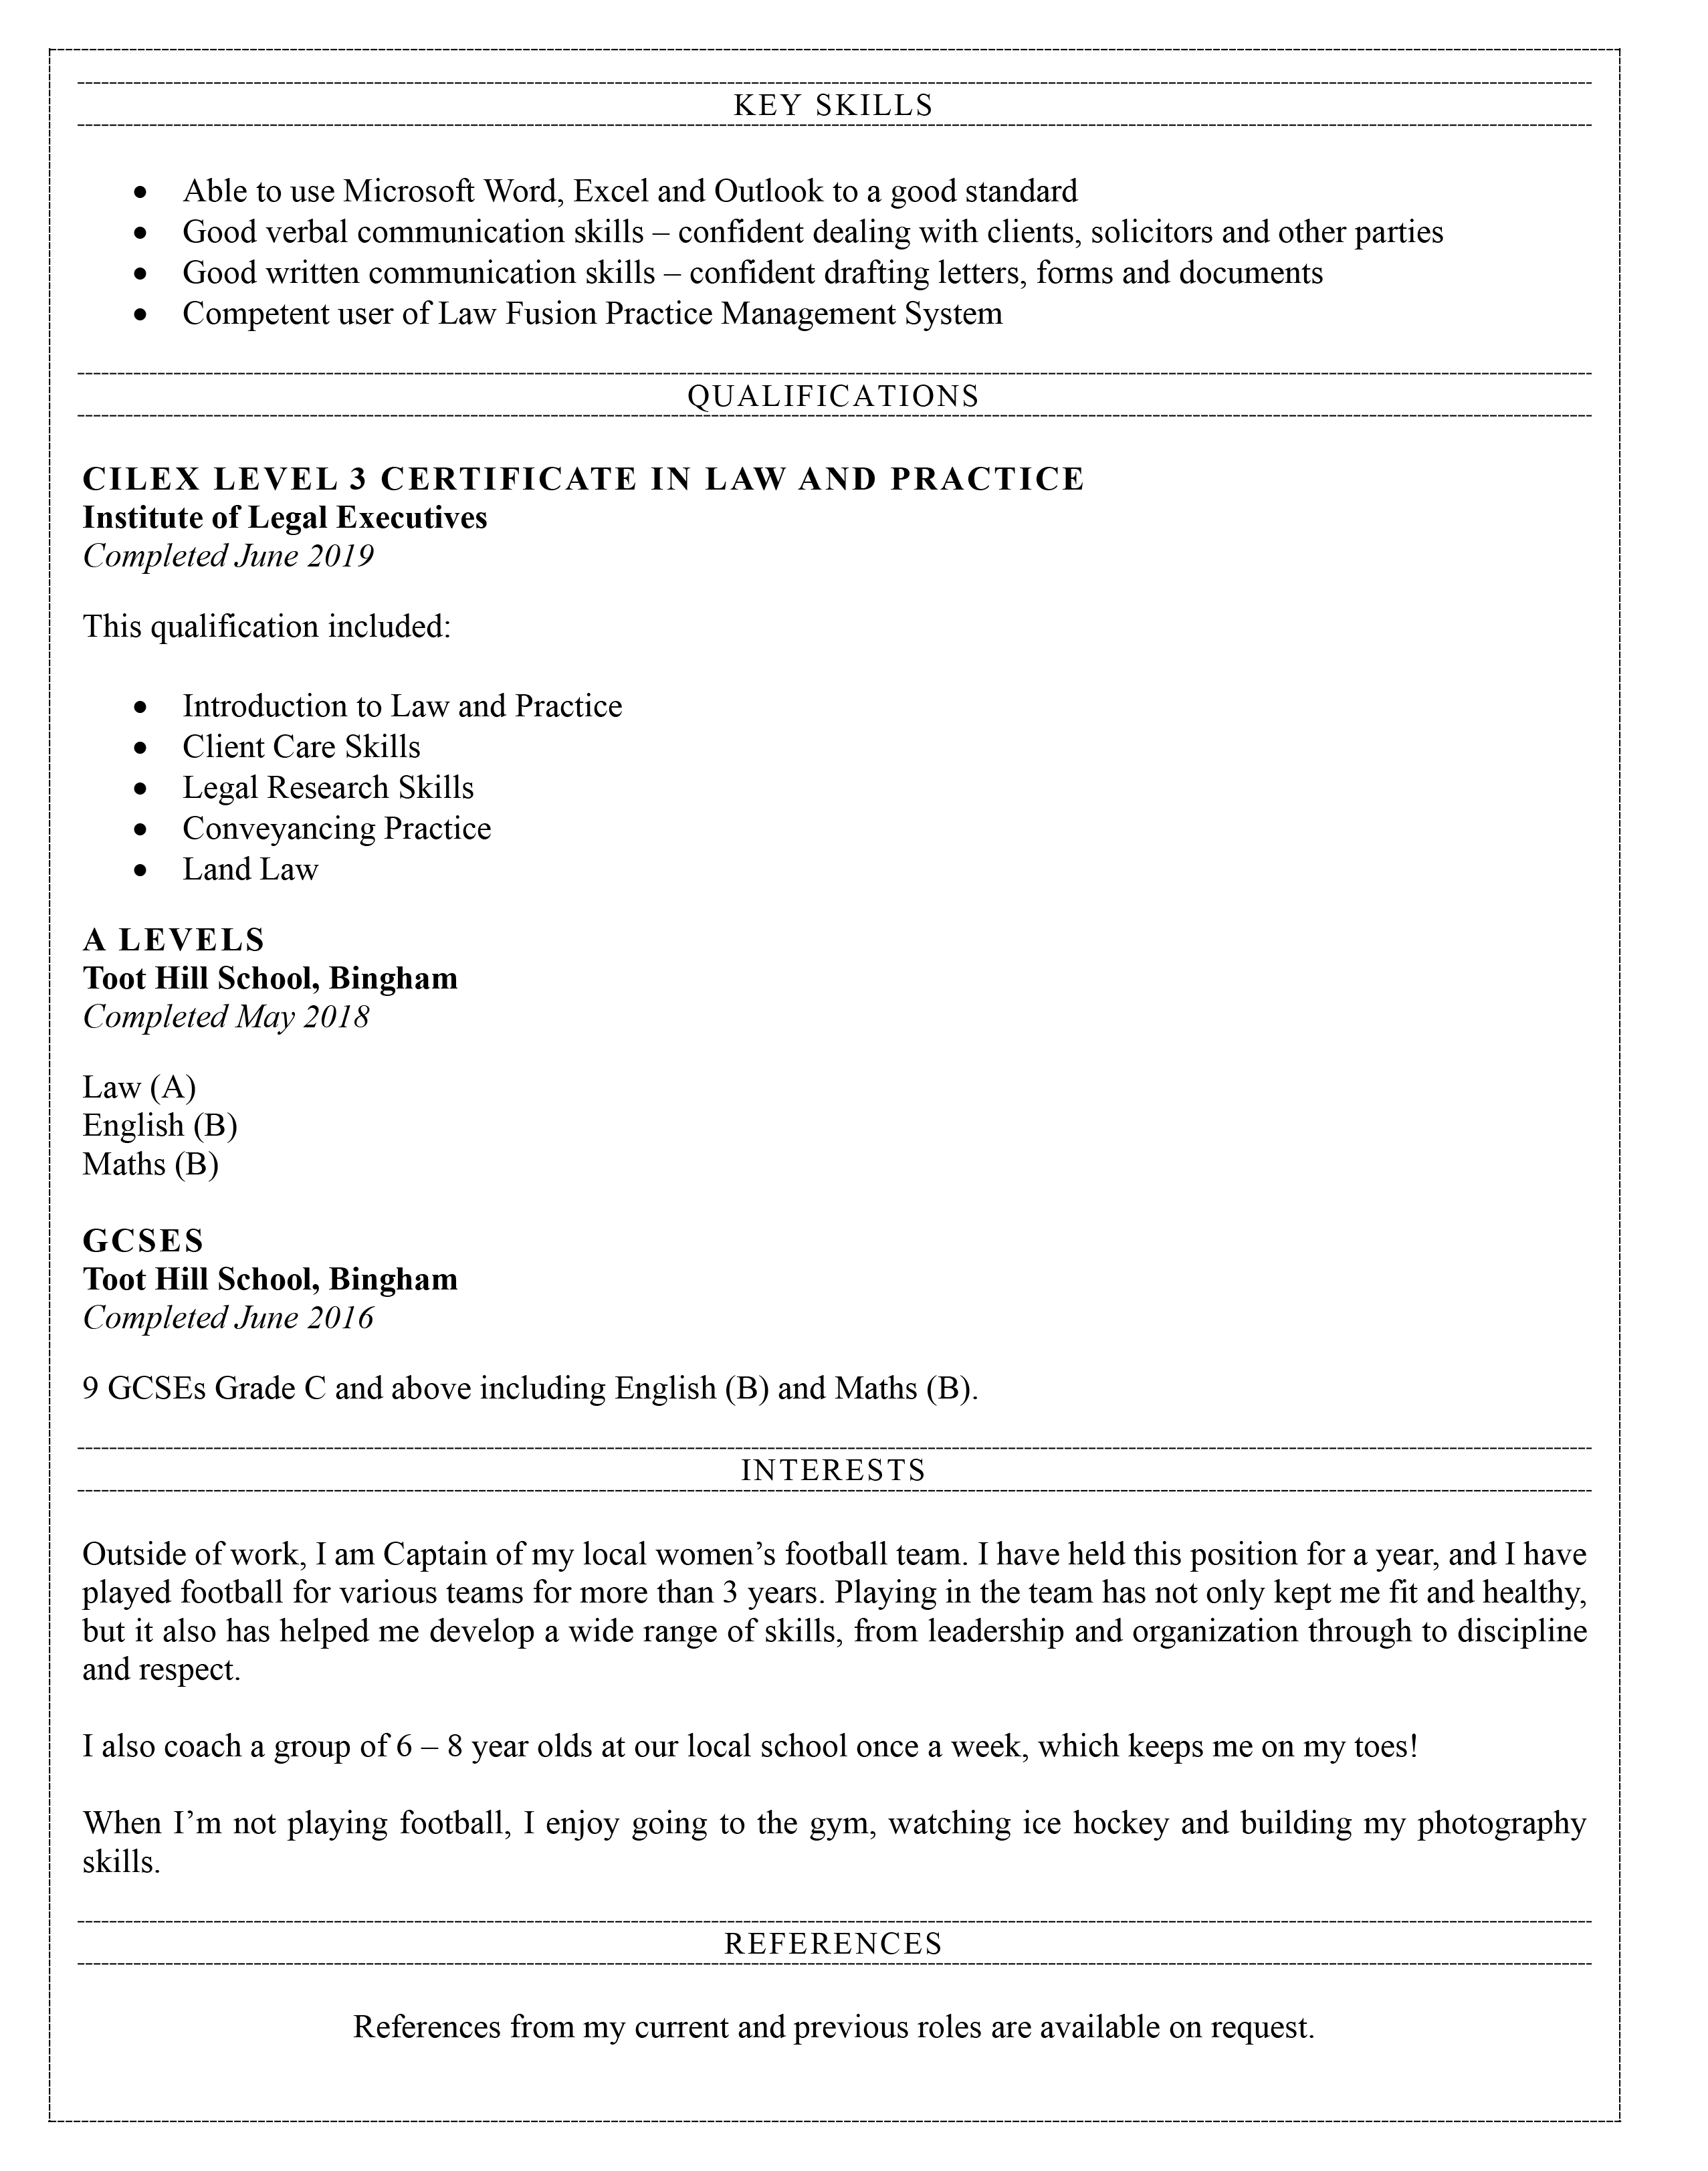 Legal Assistant CV template - page two